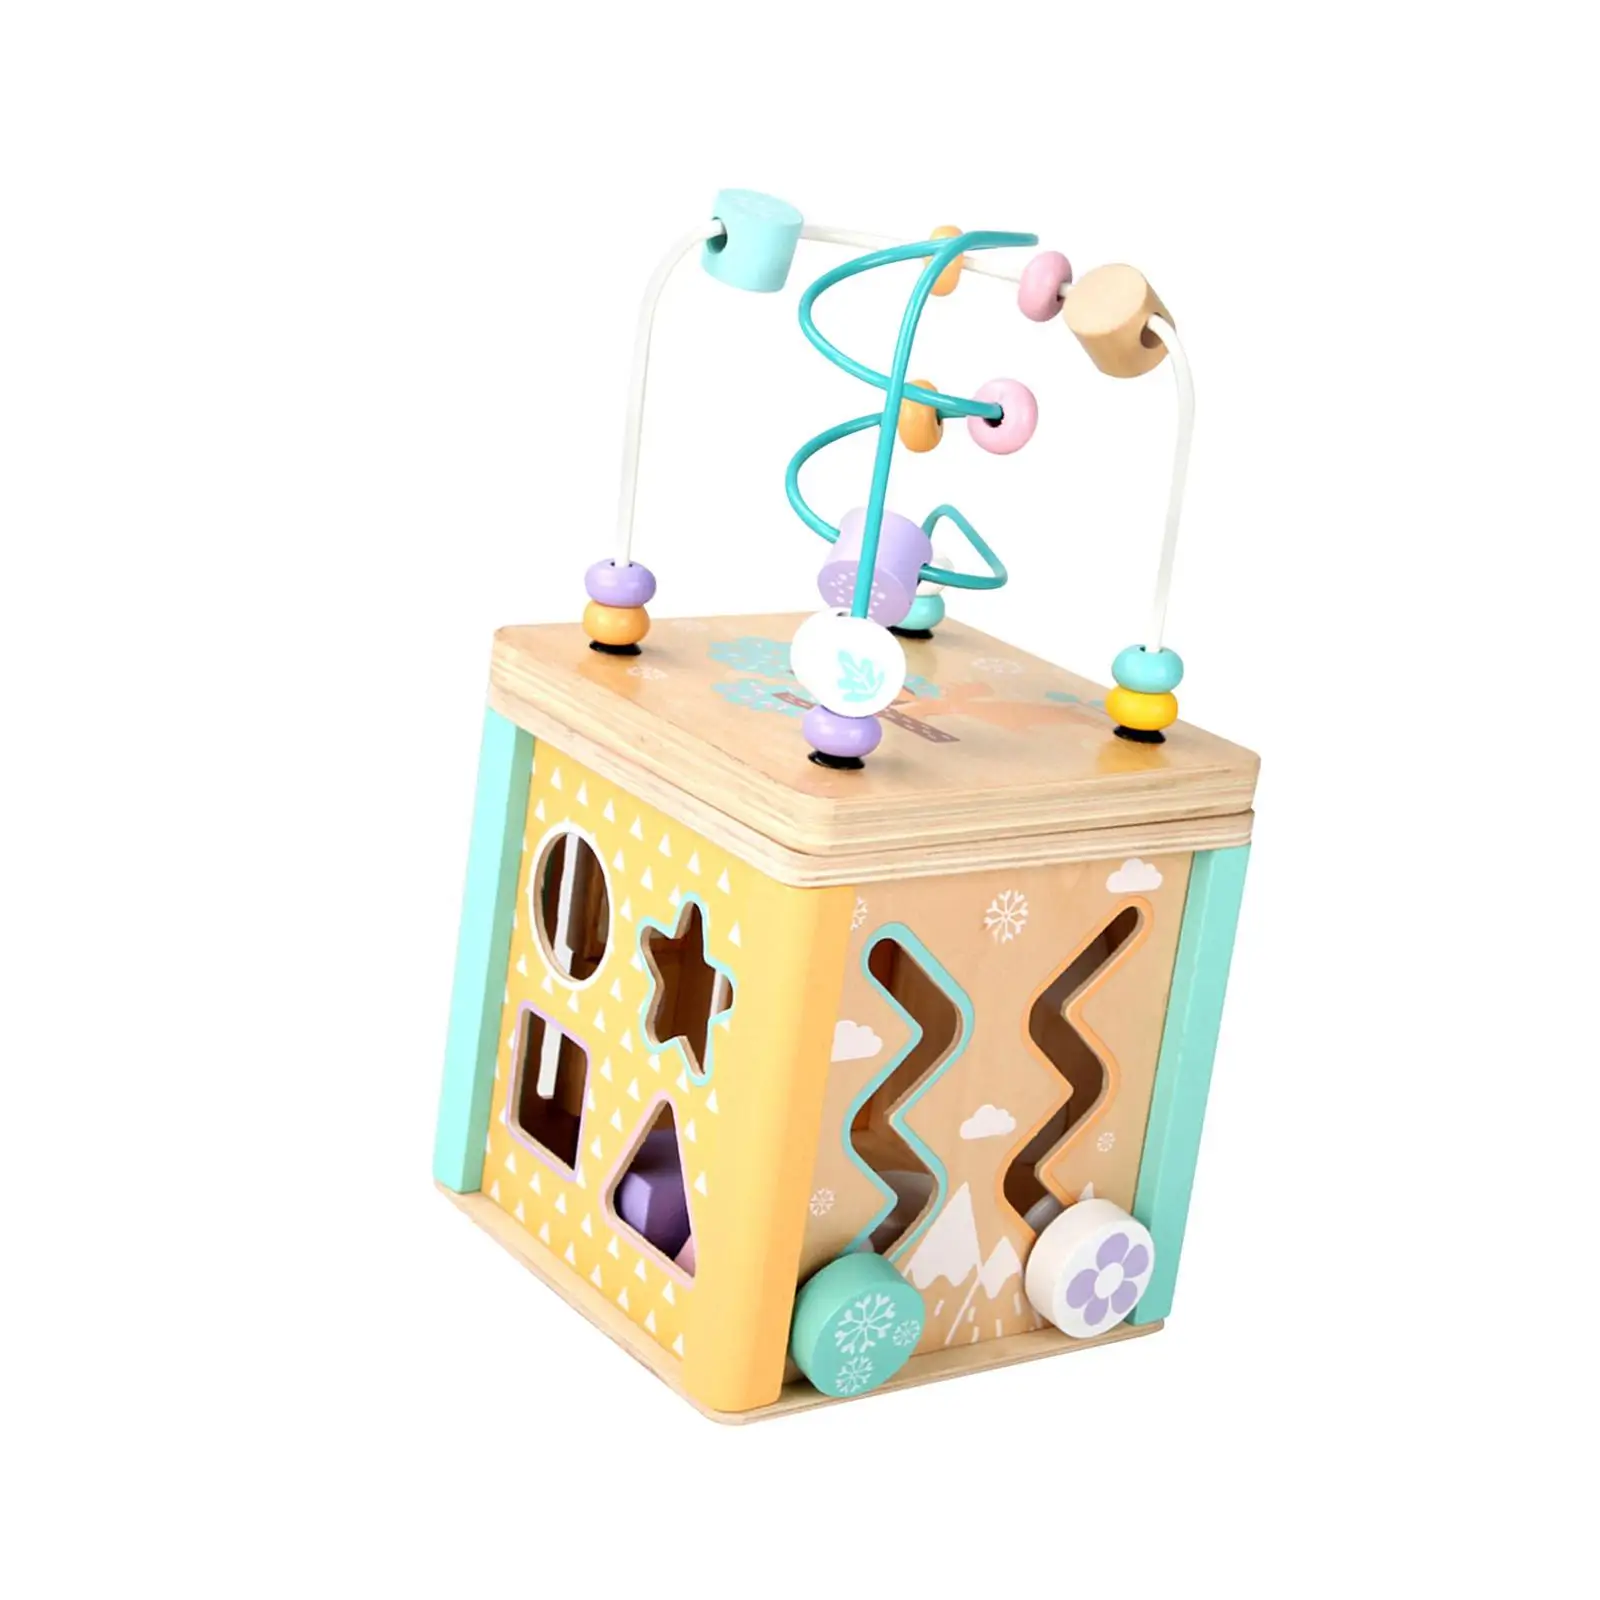 Bead Maze Toy Colorful Wooden Educational Toy Multi Function Developmental Toys Classic Bead Maze for Toddlers Ages 3+ Preschool